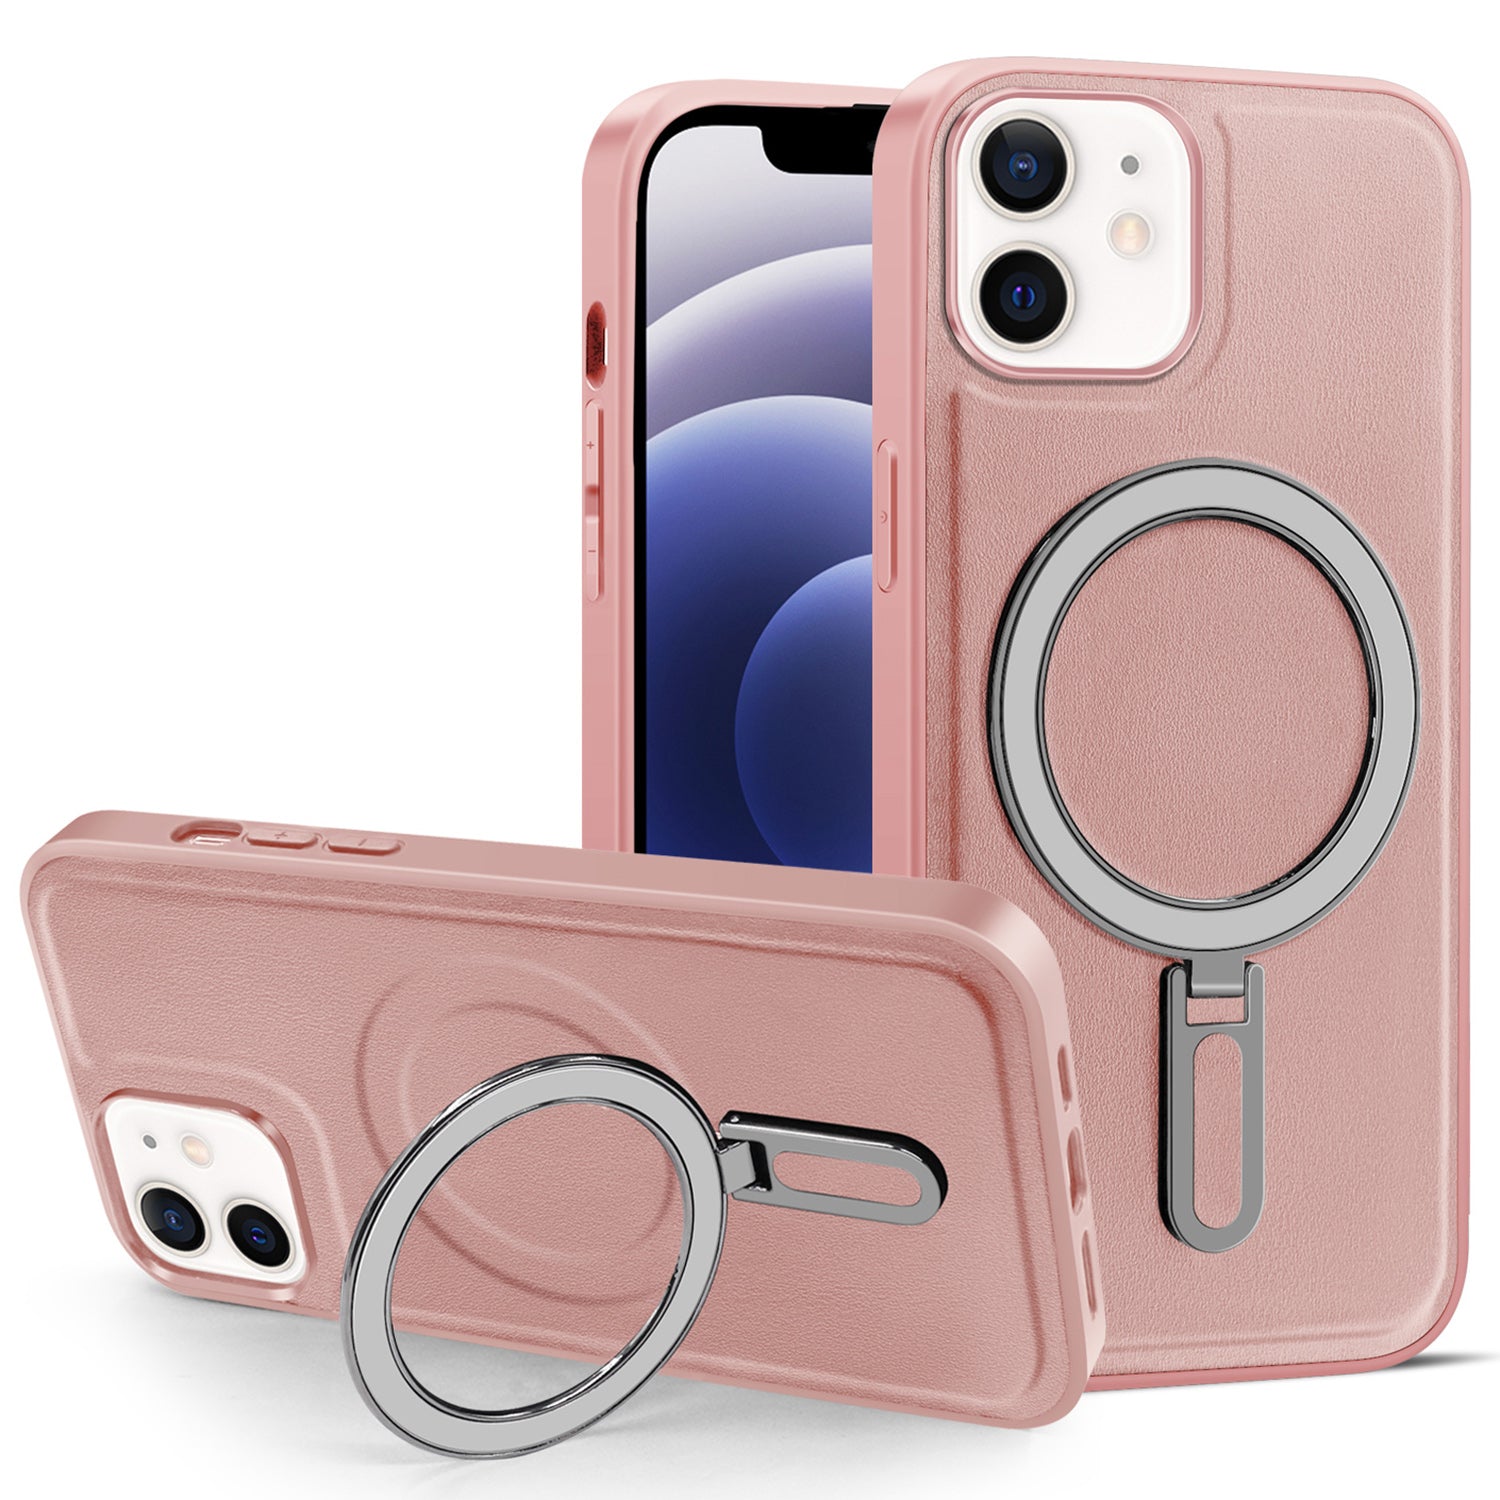 Uniqkart for iPhone 12 / 12 Pro 6.1 inch Phone Case Kickstand Design PU Leather Coated PC+TPU Magnetic Cover - Pink